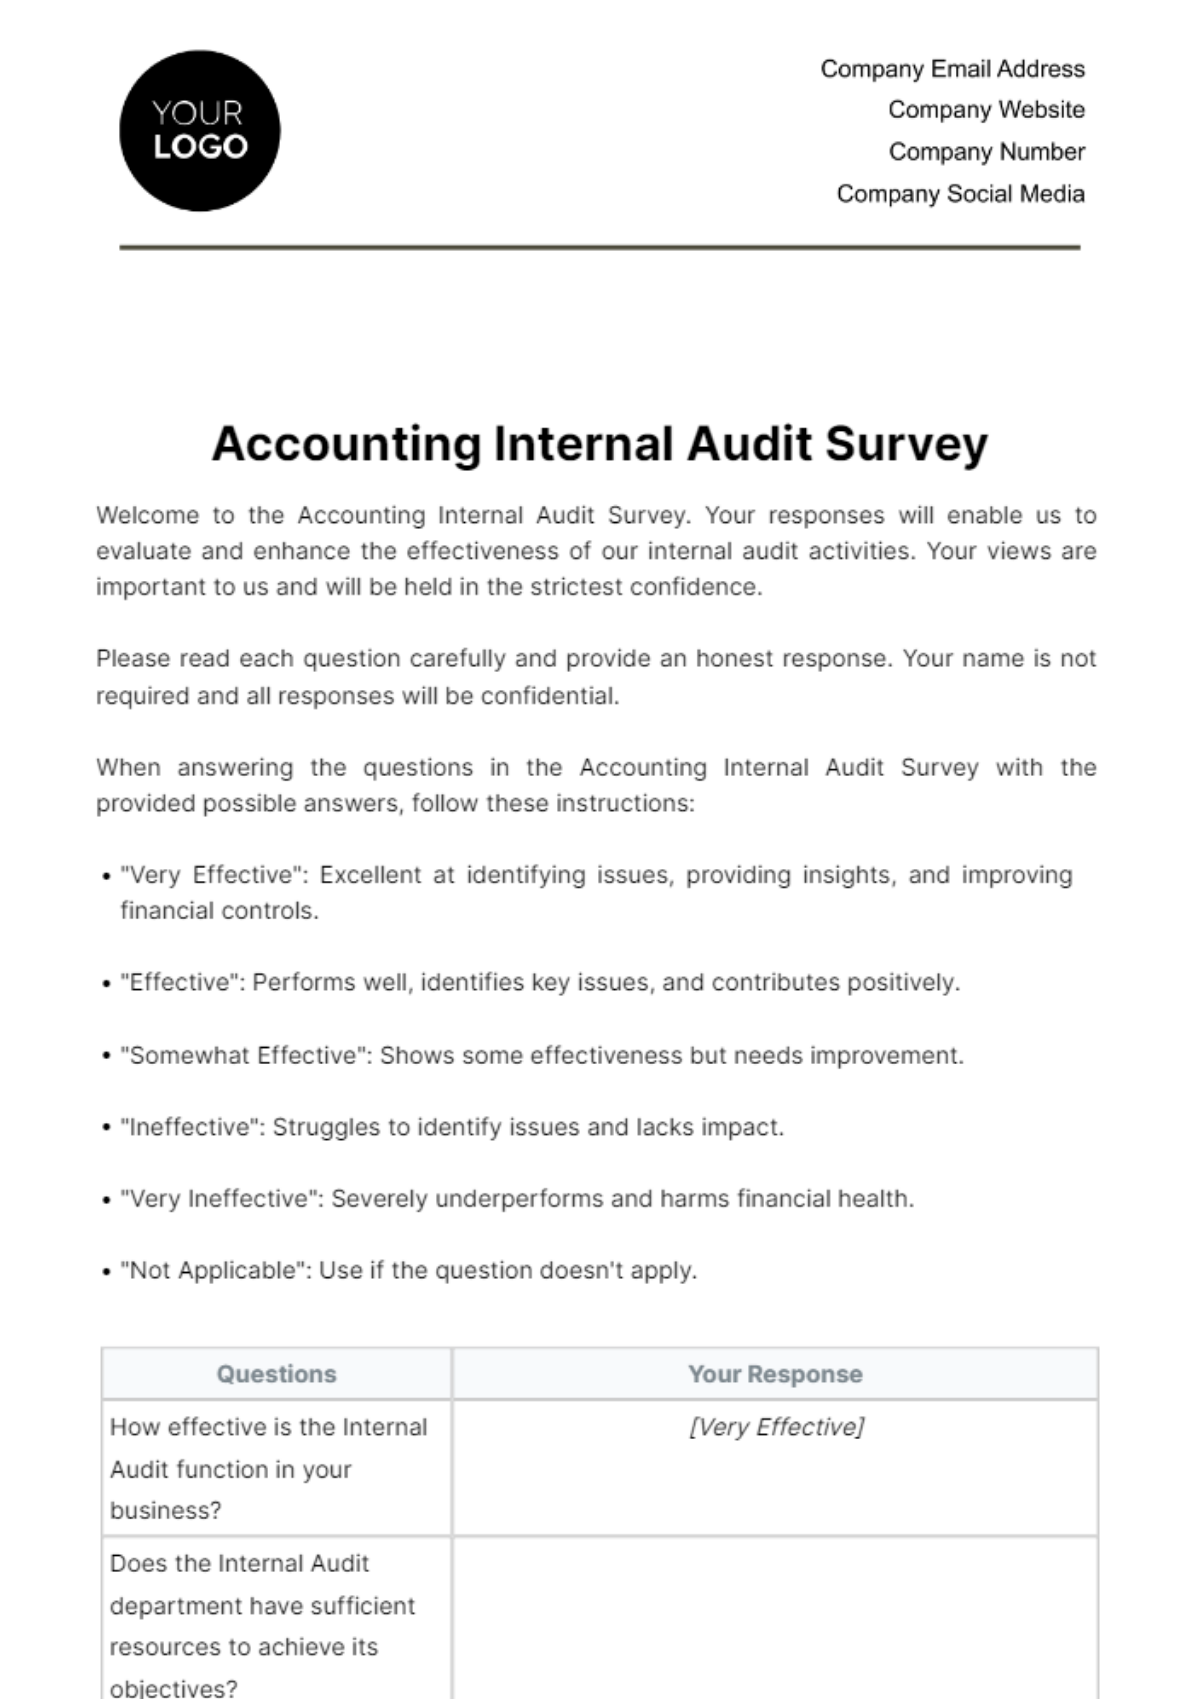 Accounting Internal Audit Survey Template